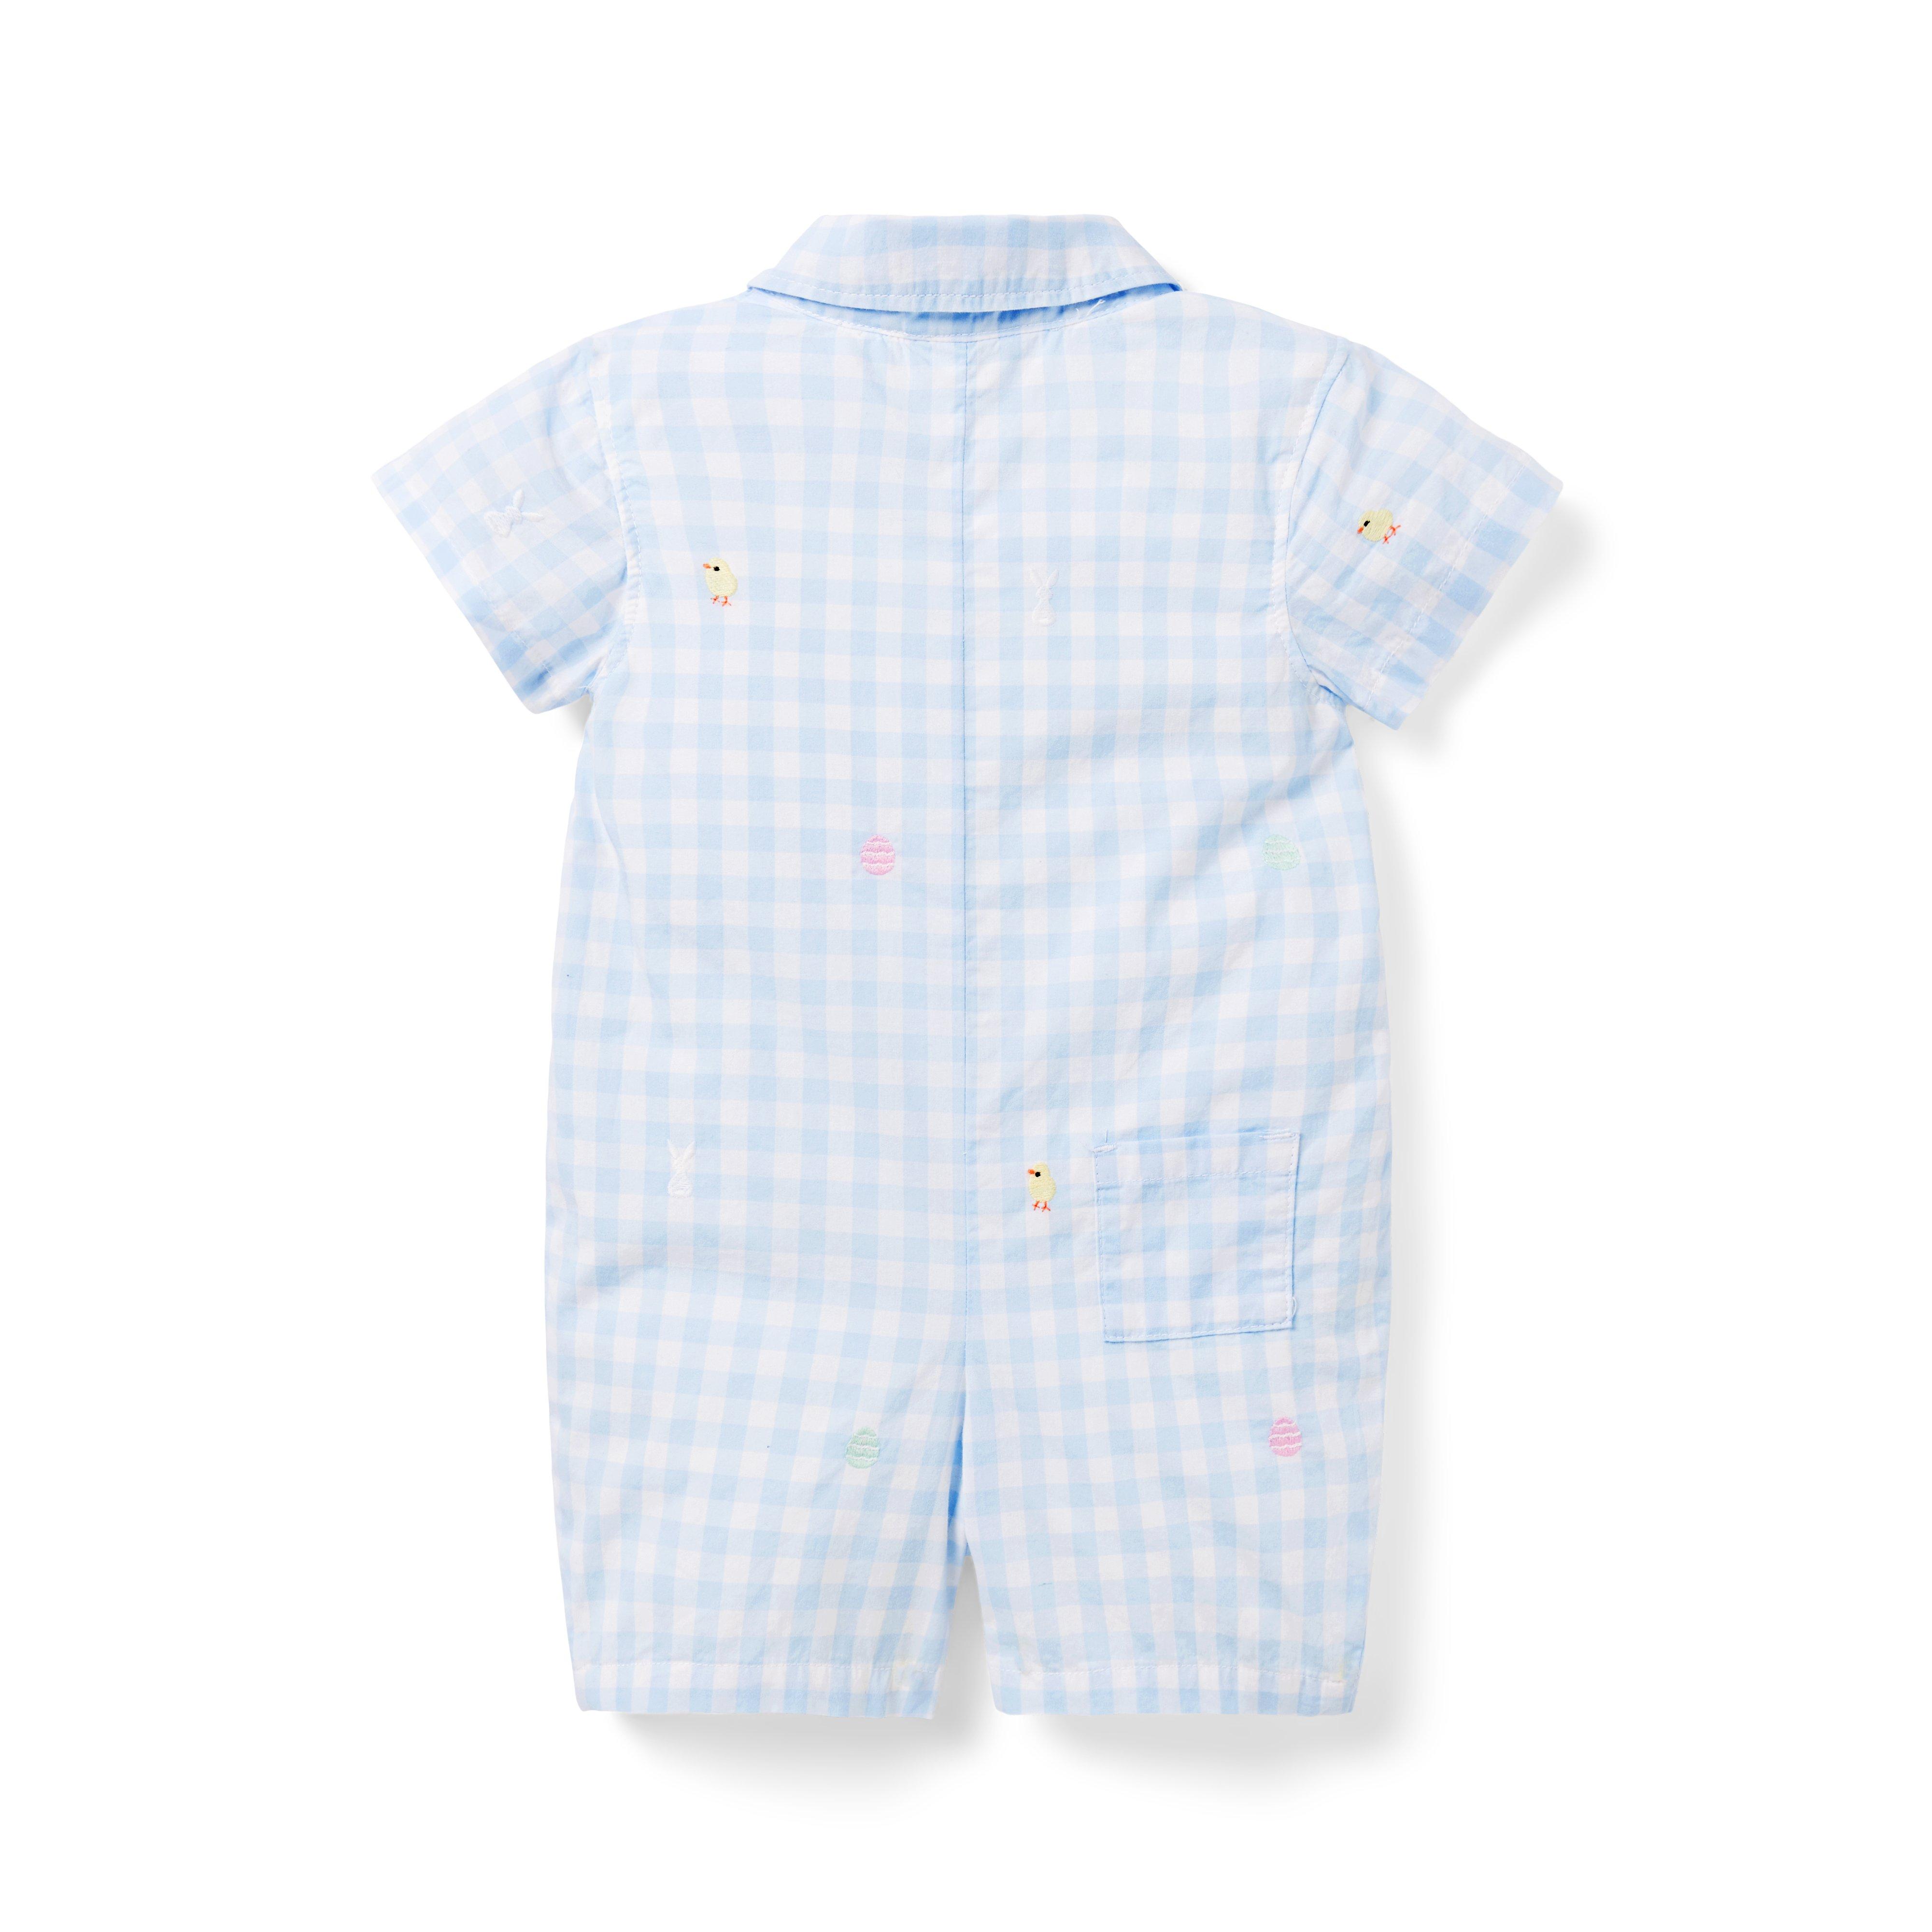 The Embroidered Gingham Baby Romper